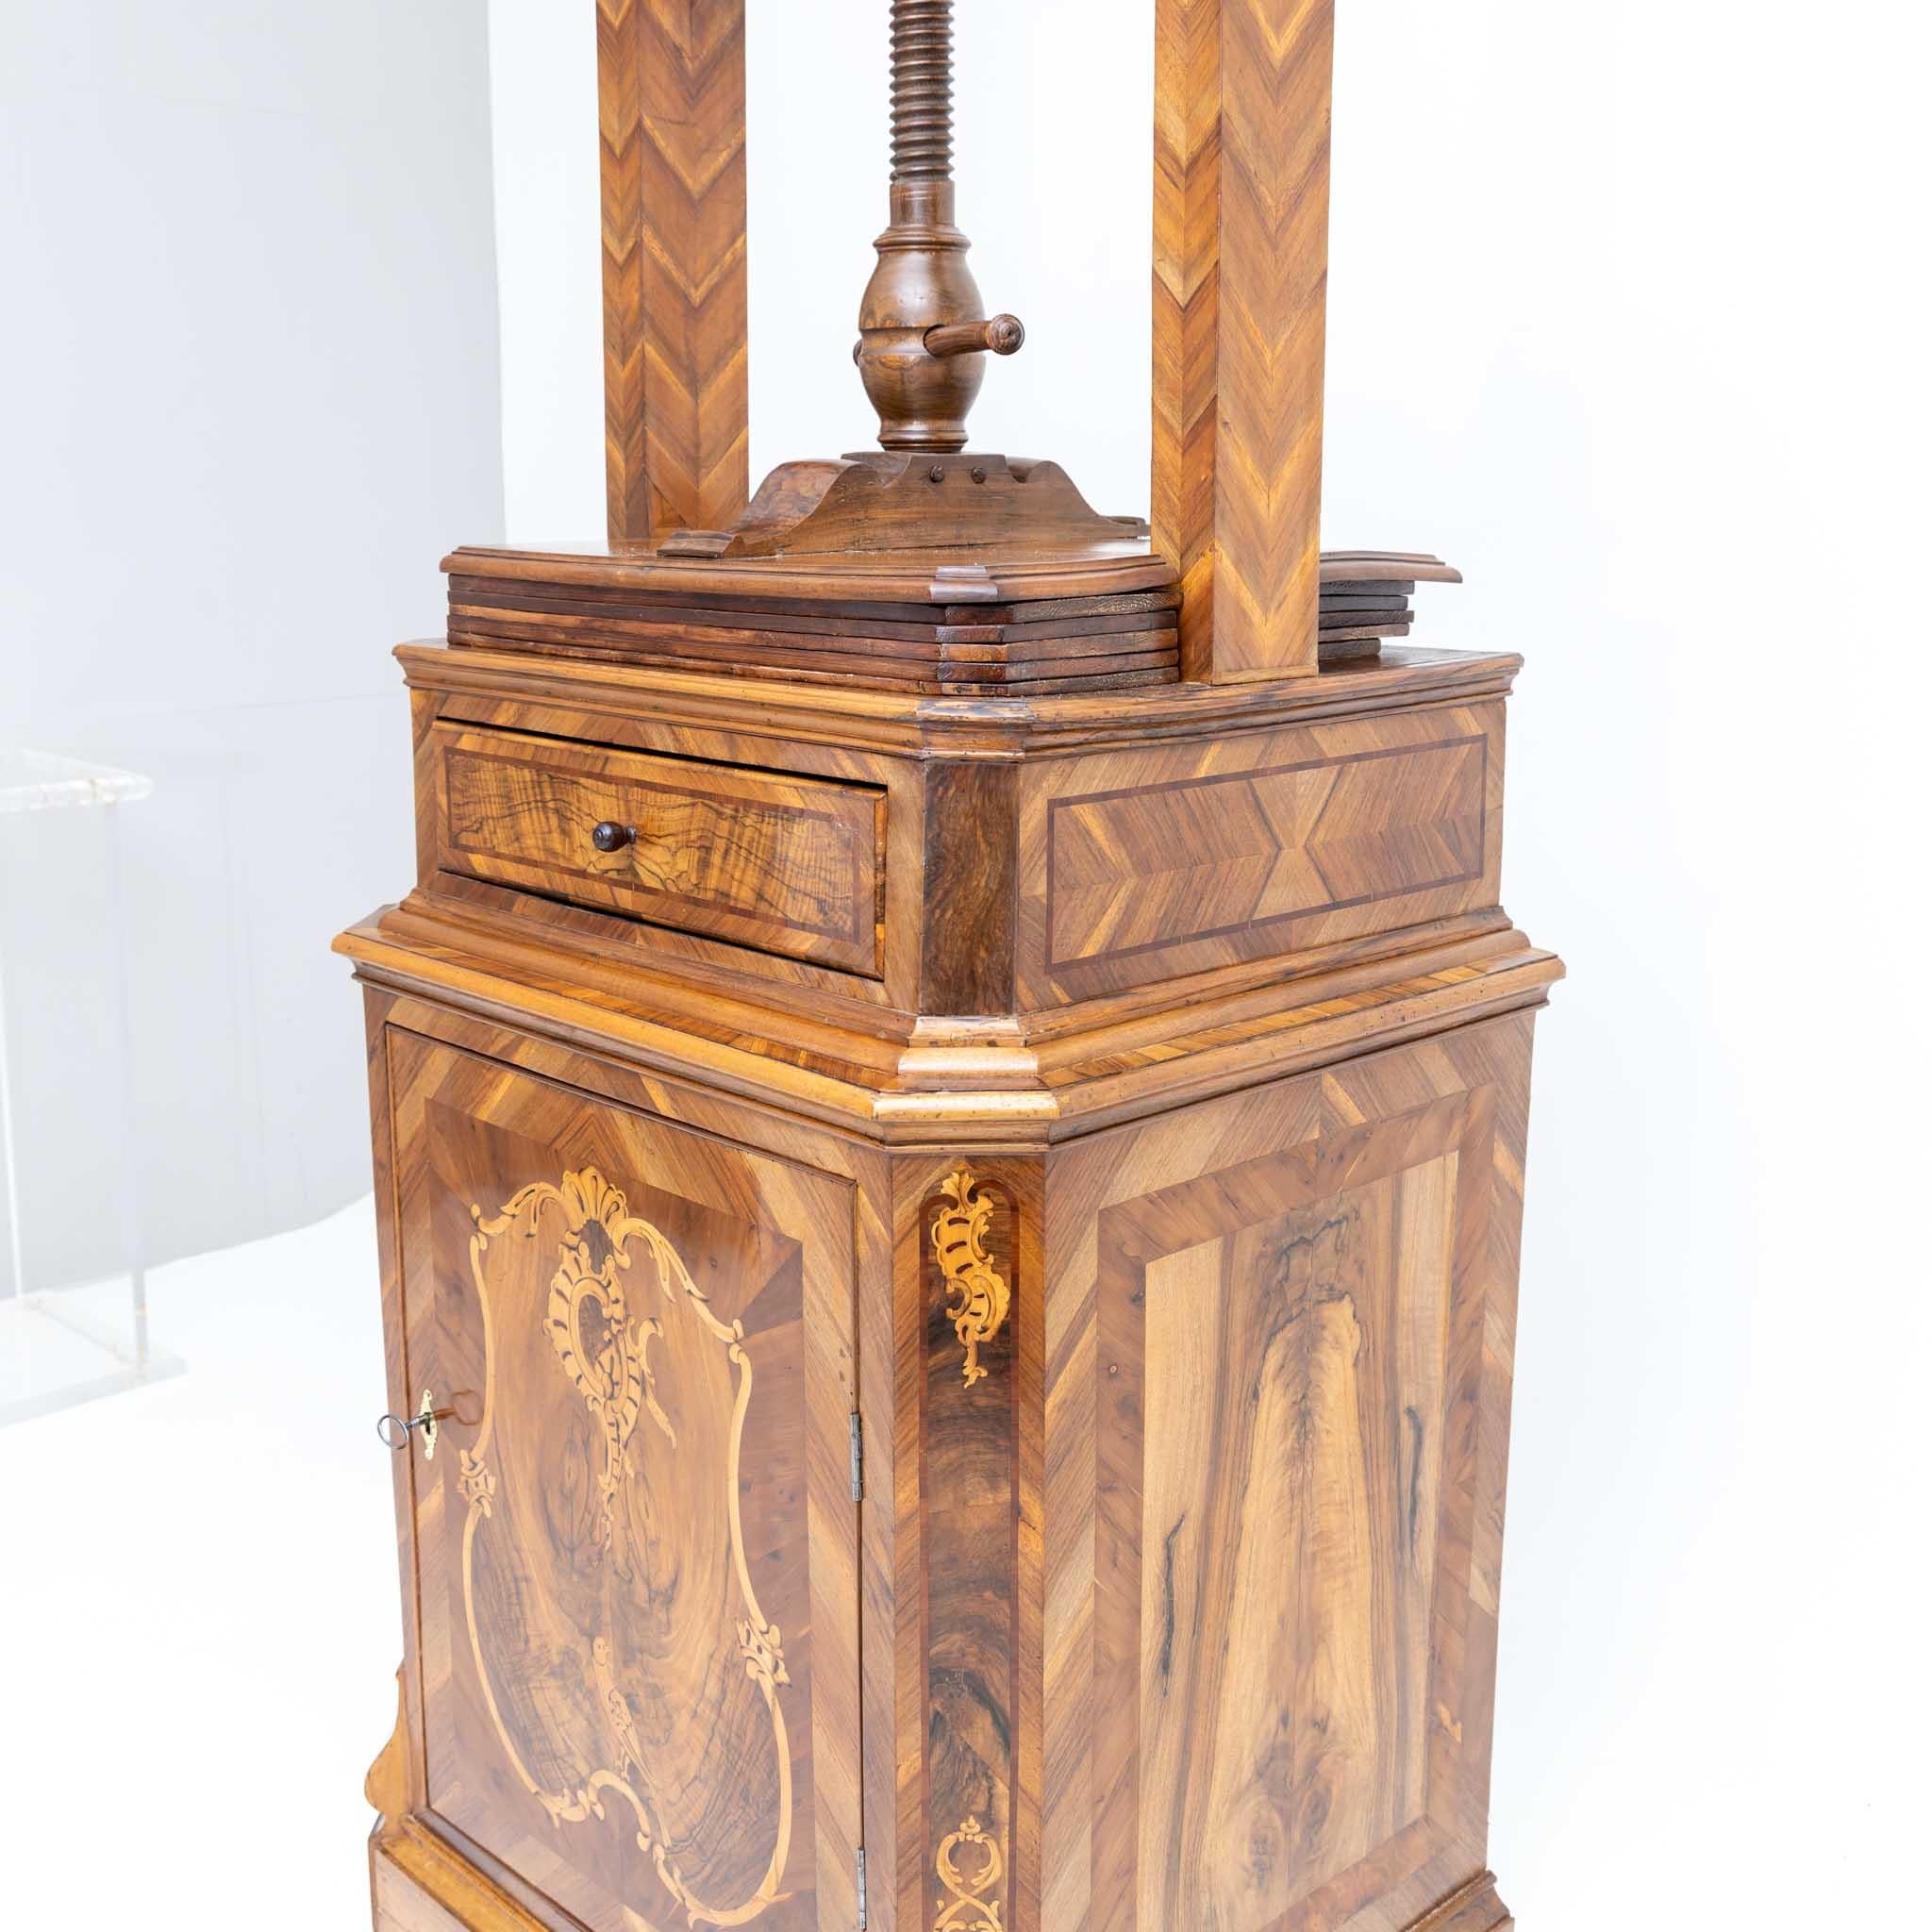 Laundry or linen press with six shelves for smoothing everyday linen such as tablecloths, bed linen, scarves and napkins. This spindle press features a single-door base and is equipped with a drawer. The exquisitely decorated body with walnut veneer